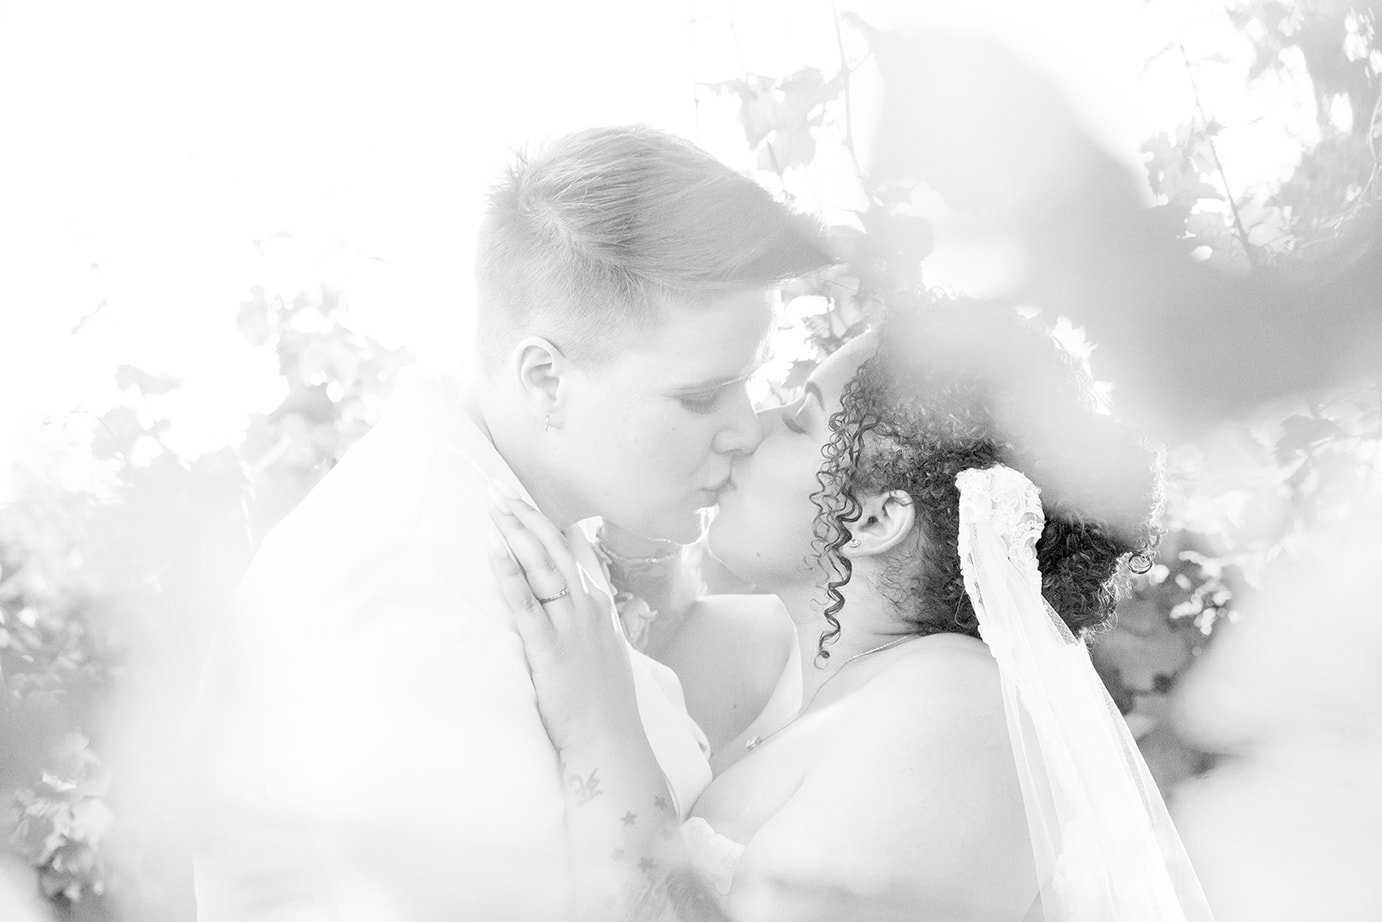 Brides kiss under the veil in a black and white photograph at Roblar Winery in Santa Ynez, CA